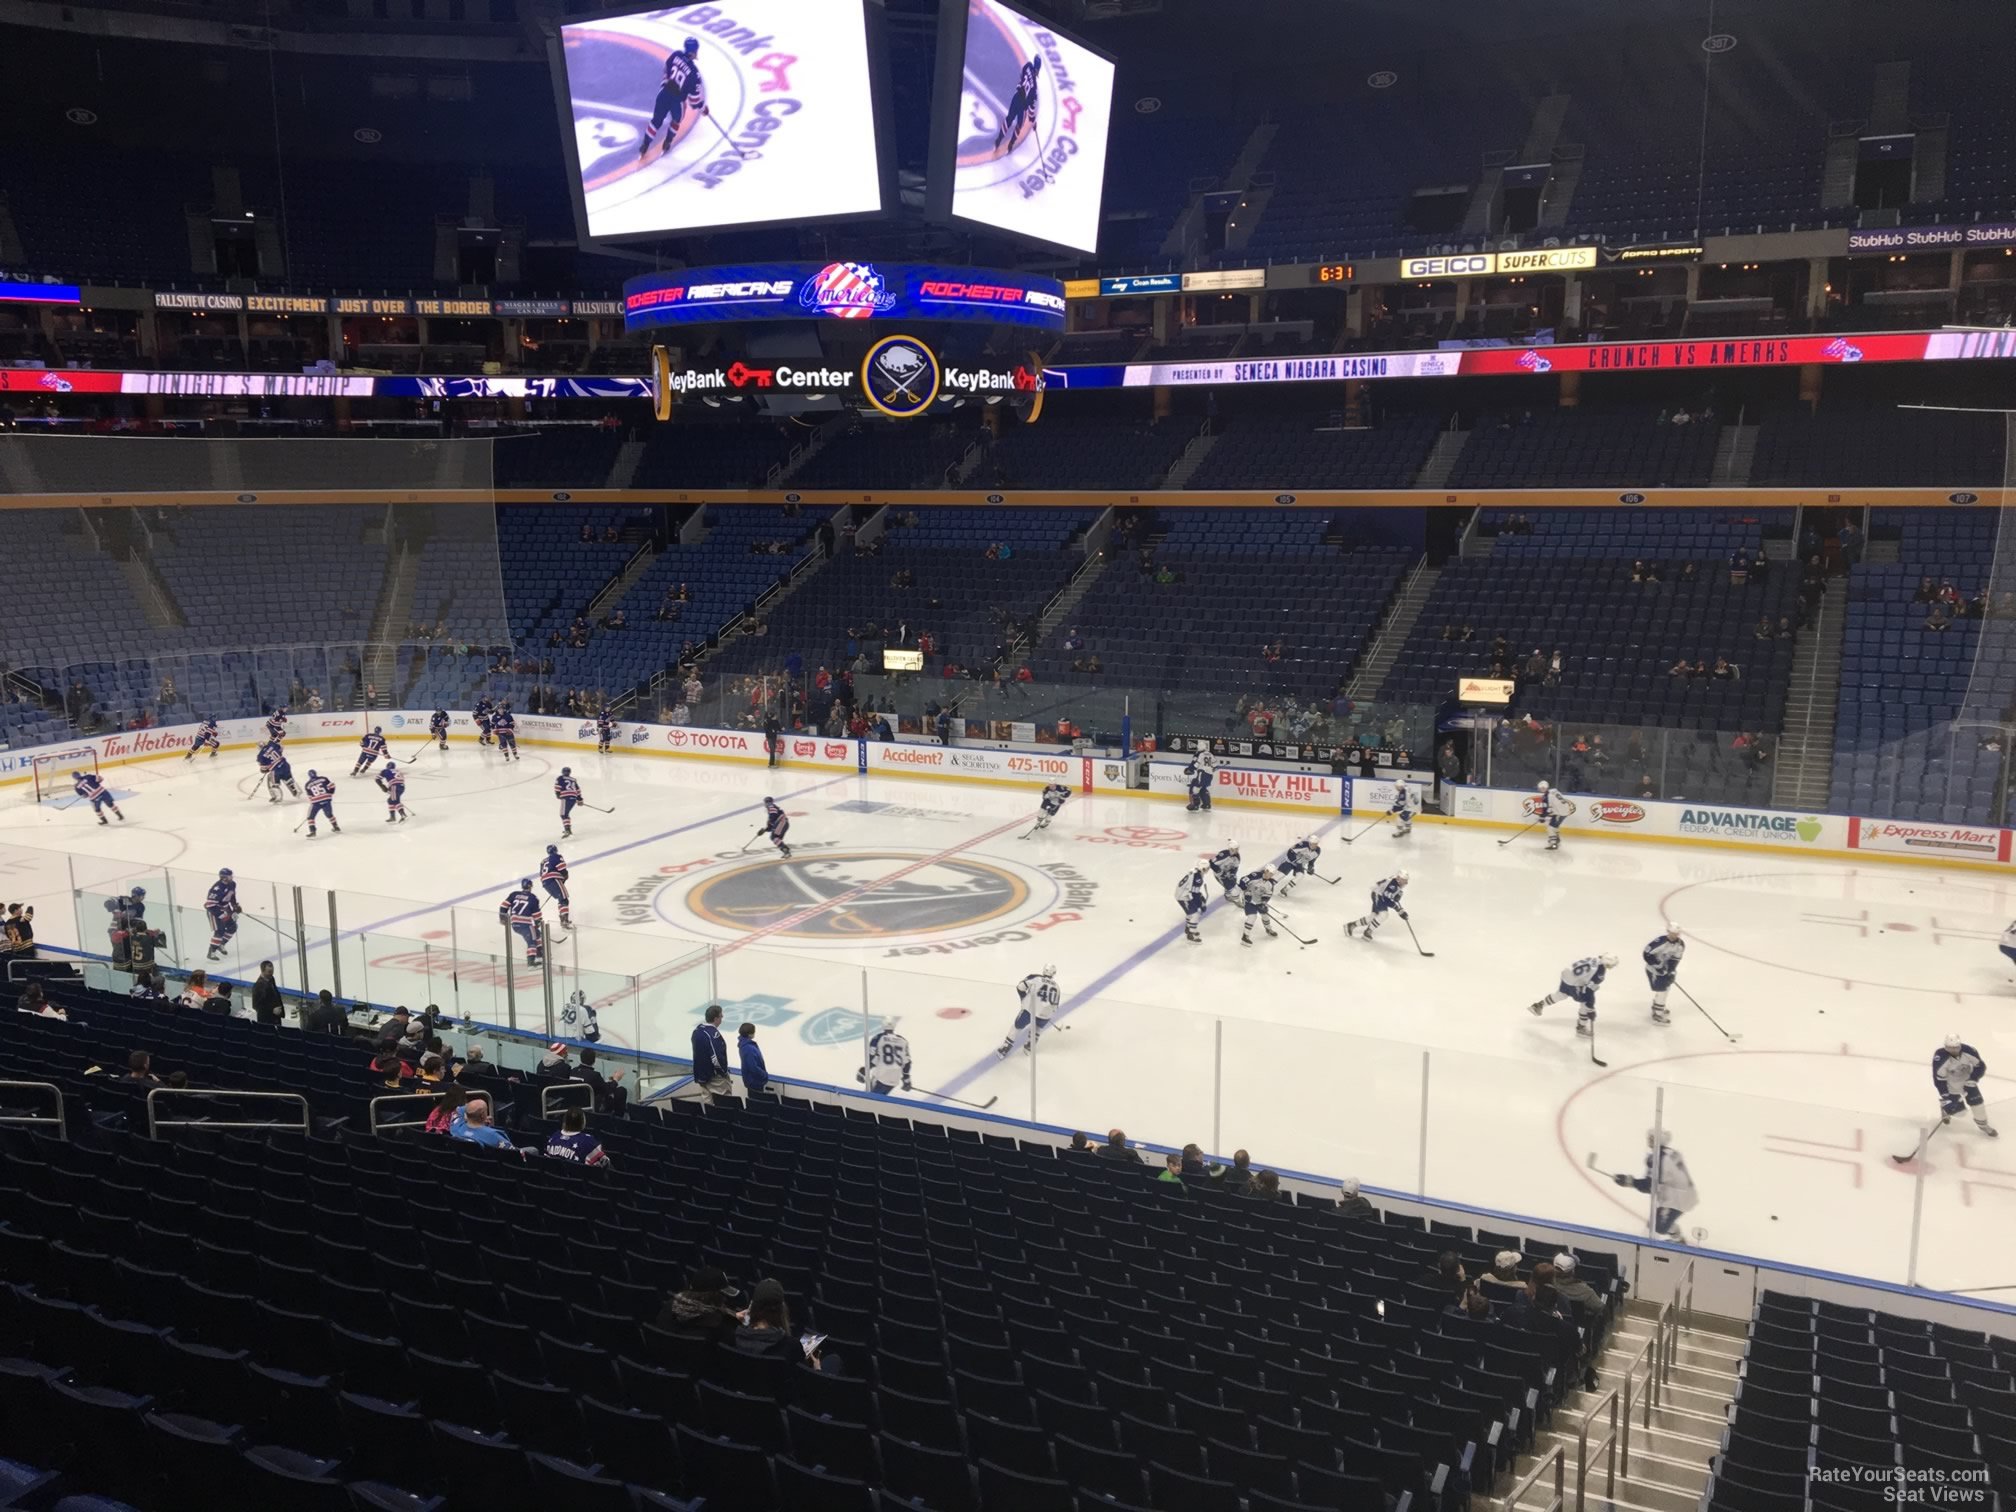 section 216, row 4 seat view  for hockey - keybank center